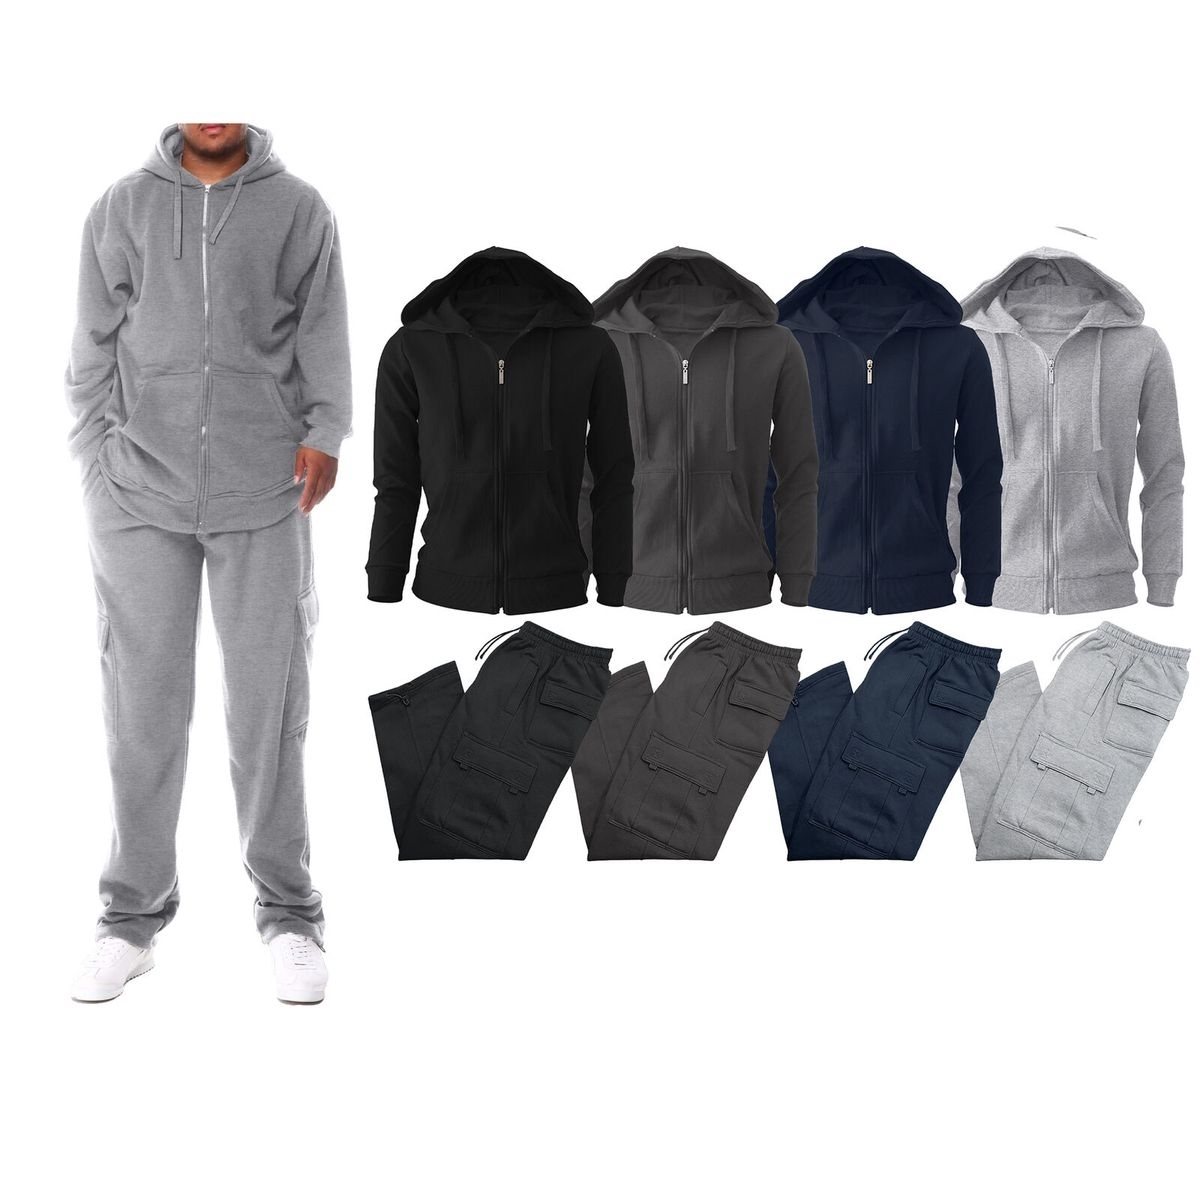 2-Pack: Men's Big & Tall Winter Warm Athletic Active Cozy Fleece Lined Multi-Pocket Full Zip Up Cargo Tracksuit - Charcoal, 3xl